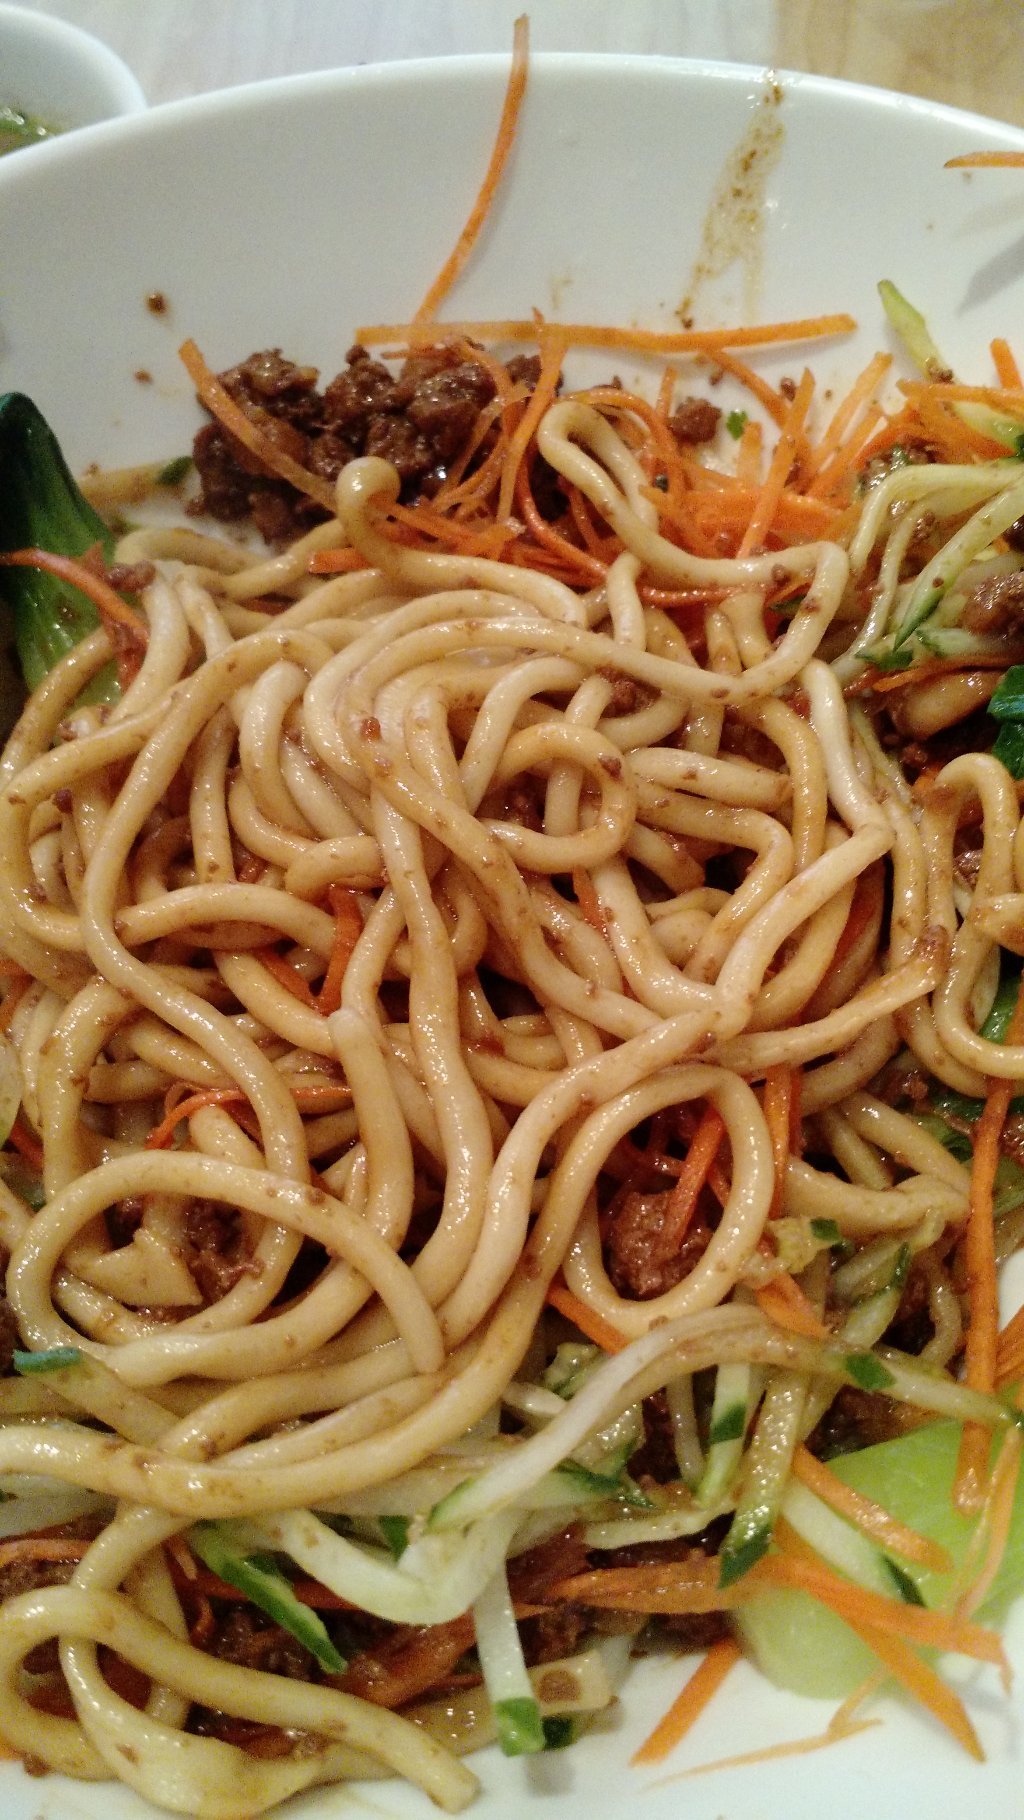 GB Hand-pulled noodles